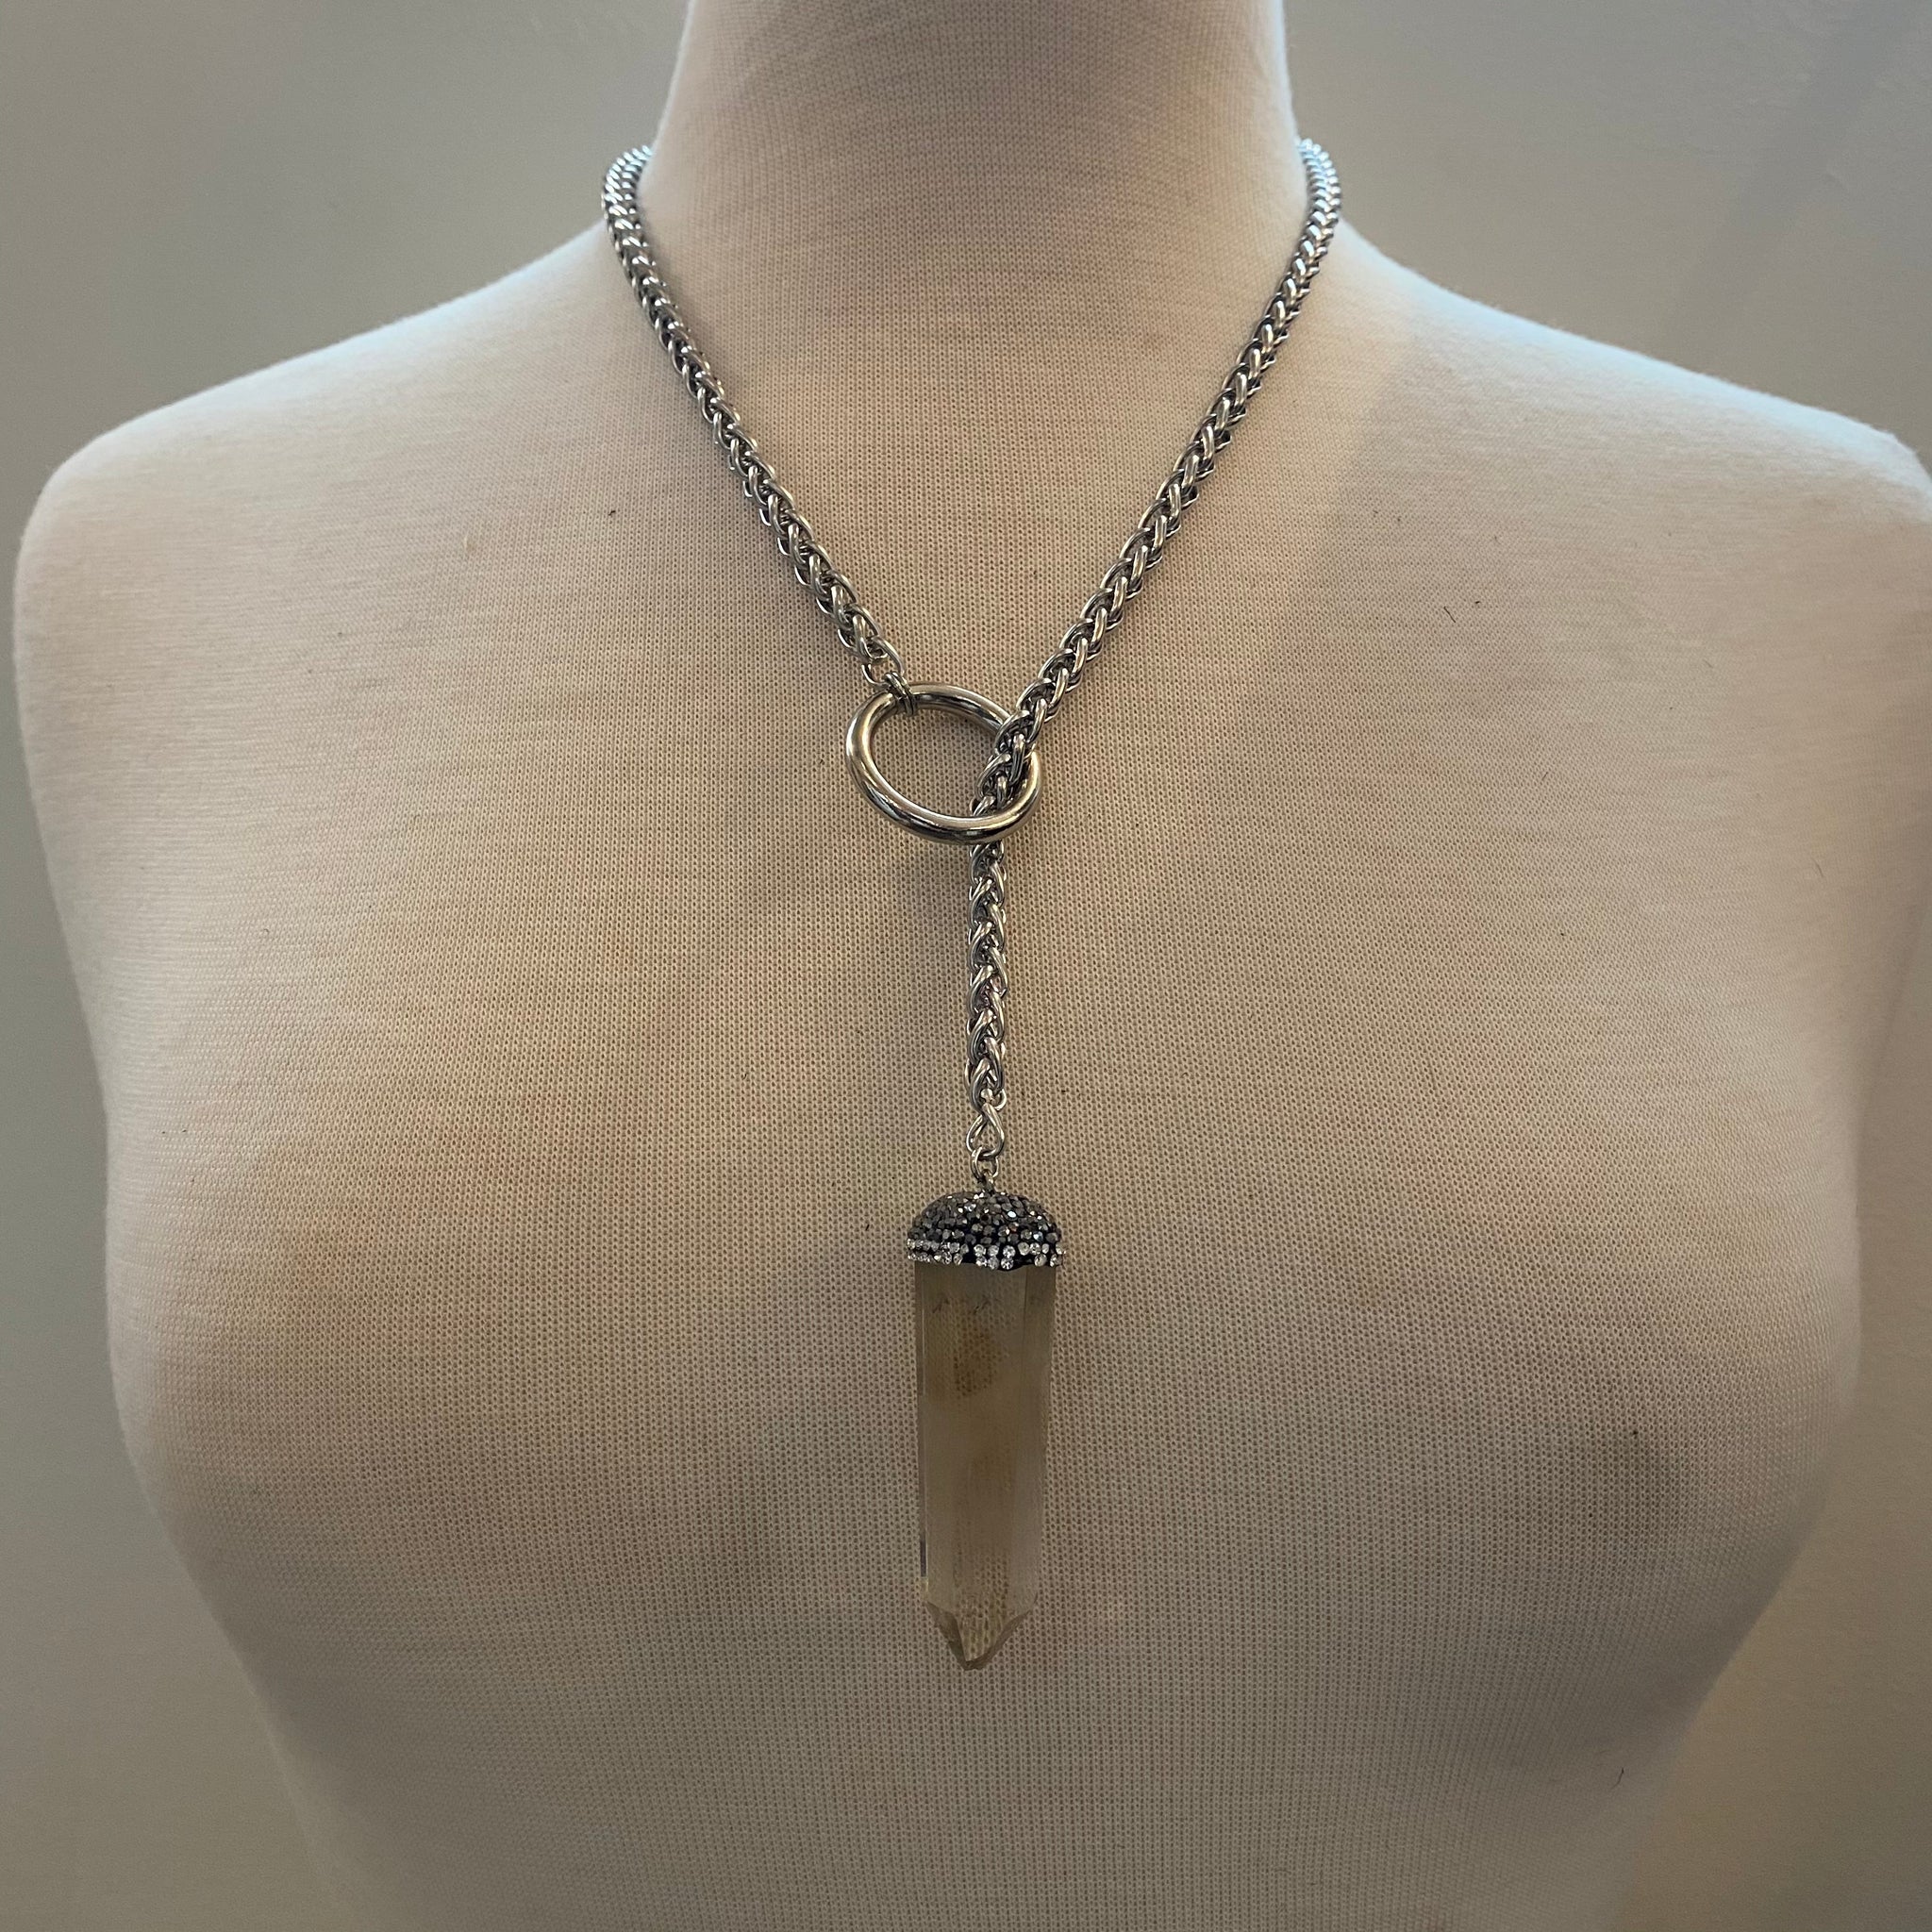 LARIAT MADE OF STAINLESS STEEL CHAIN WITH LARGE SMOKY QUARTZ PENDANT. by NYET Jewelry.